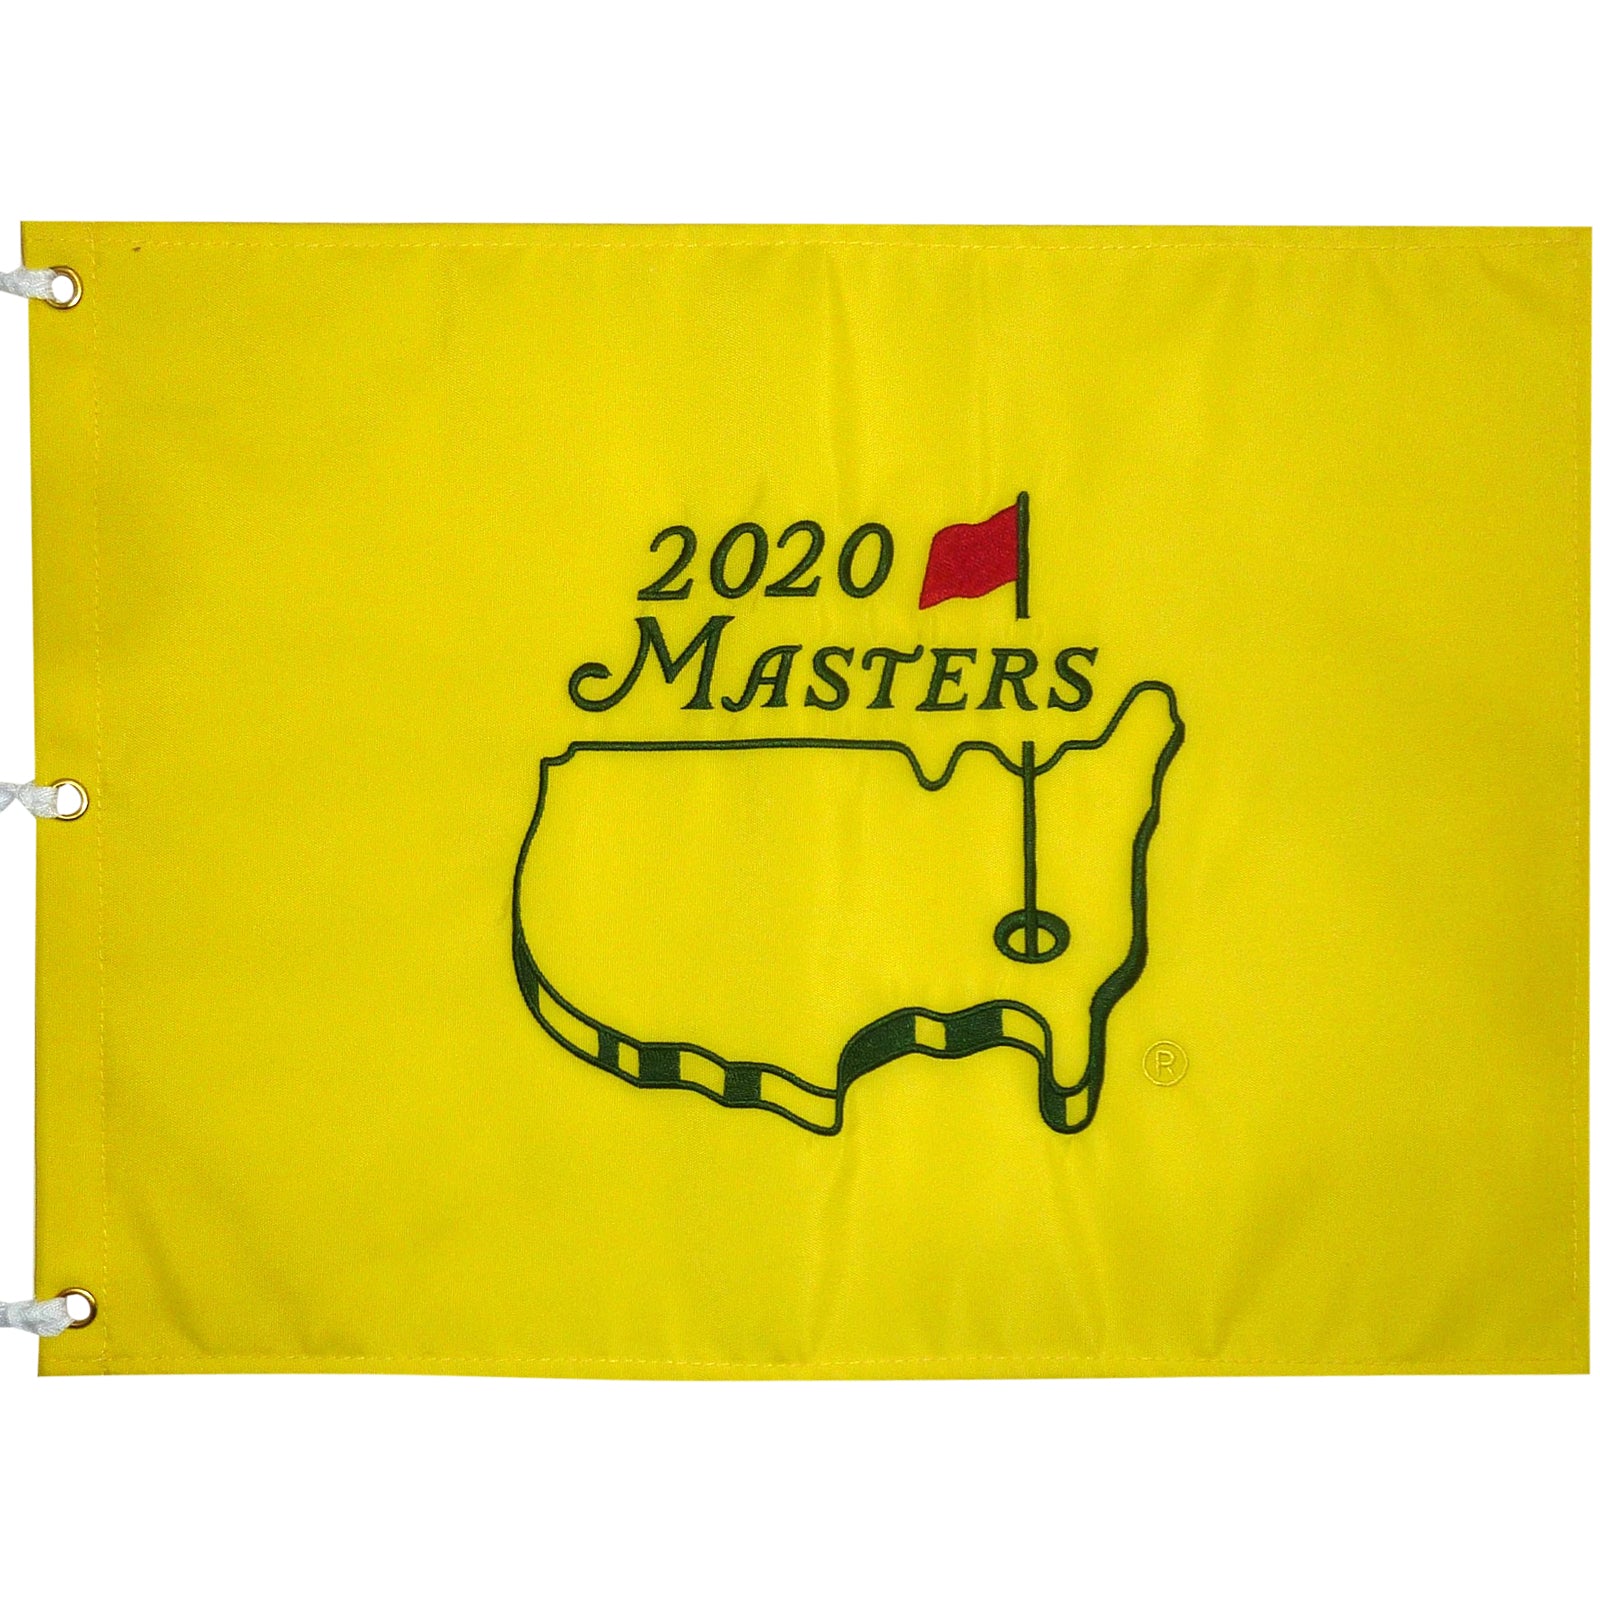 2020 Masters Embroidered Golf Pin Flag - Dustin Johnson Champion